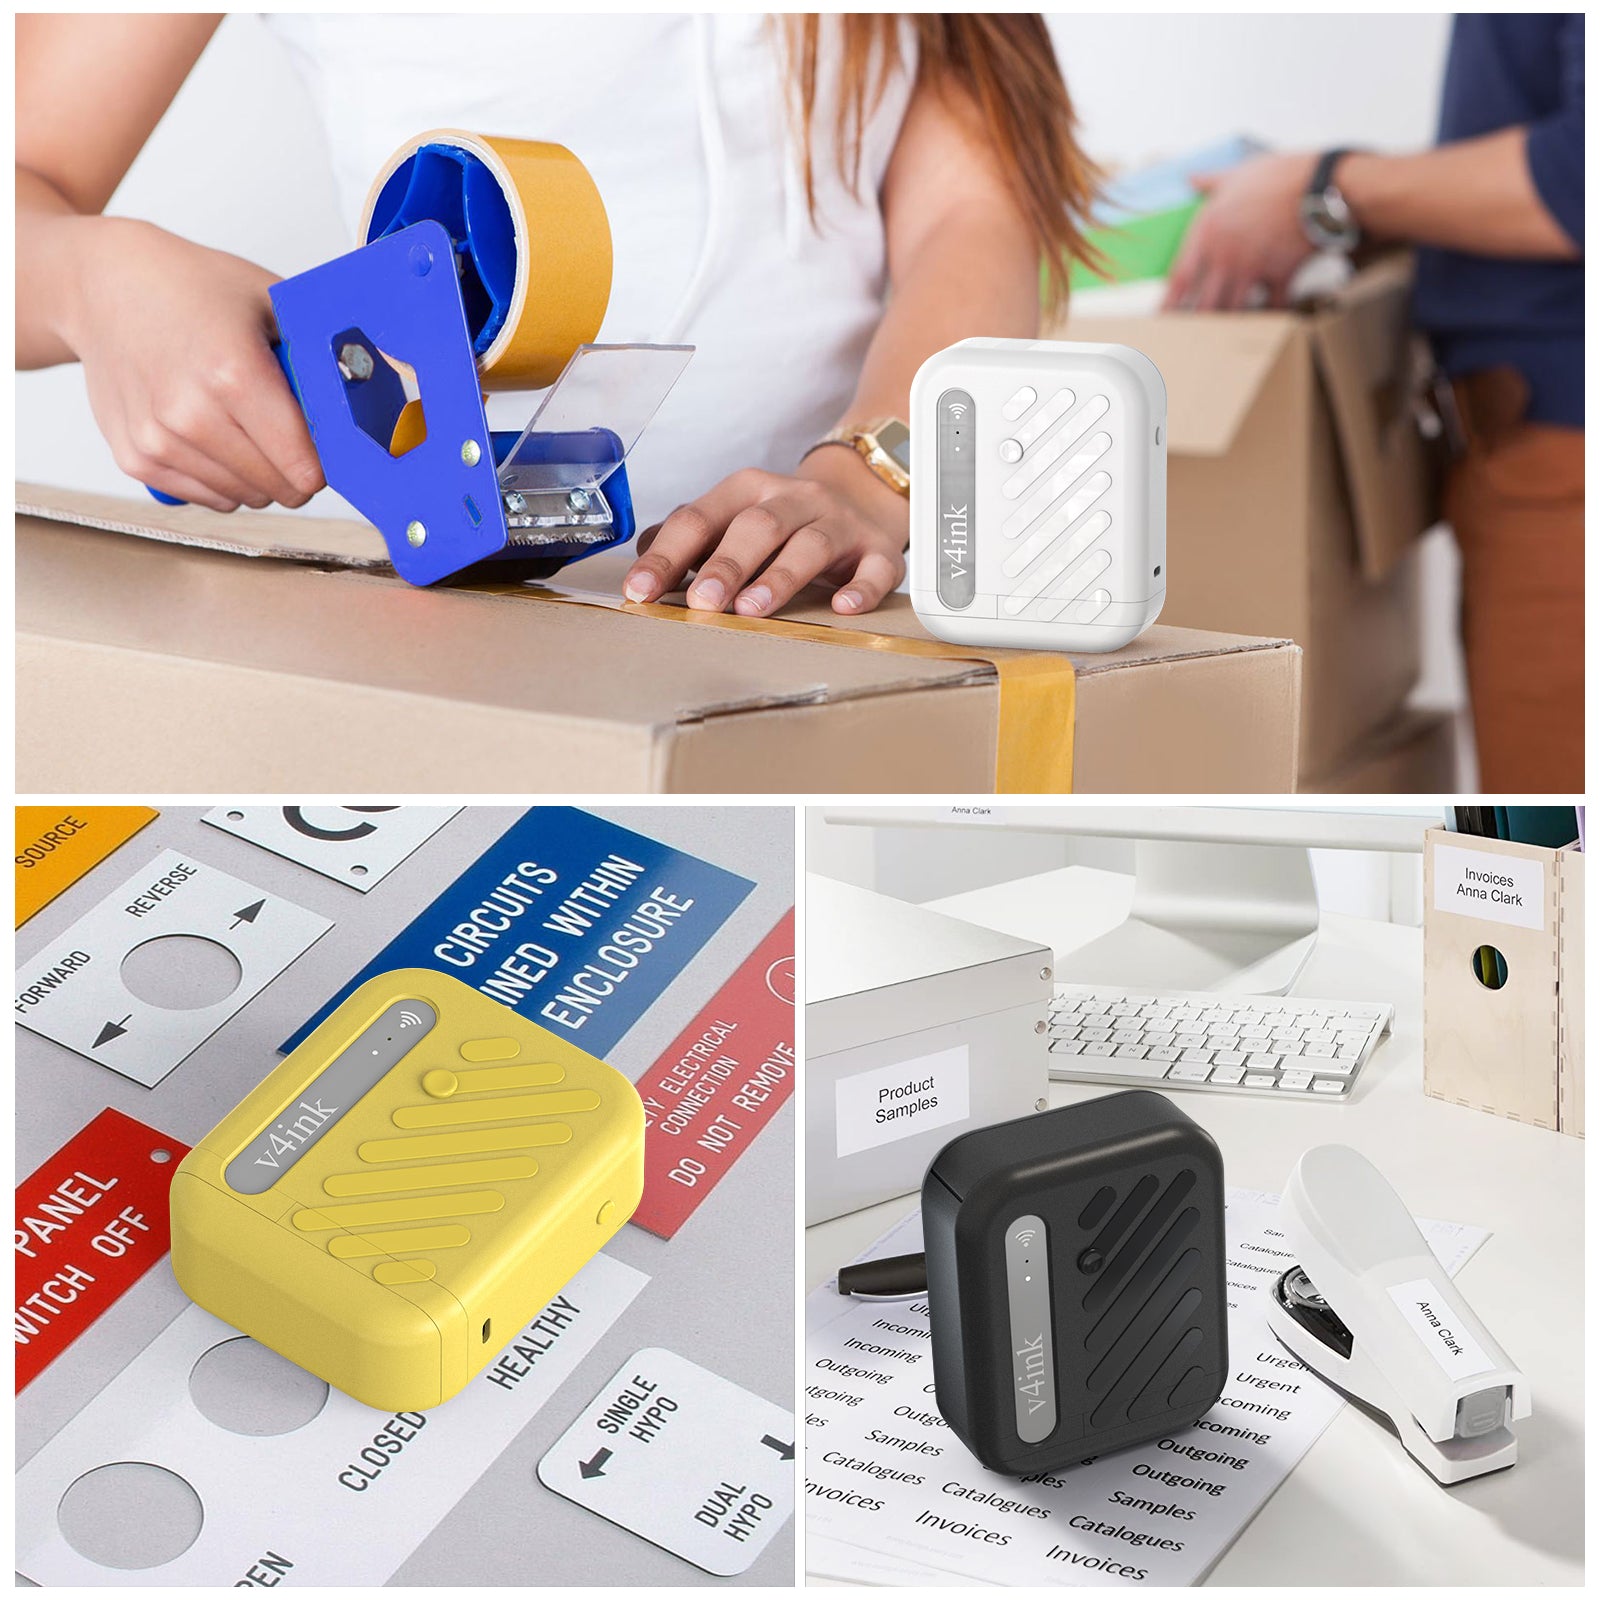 Mark and label whatever you like with B10 mini printer